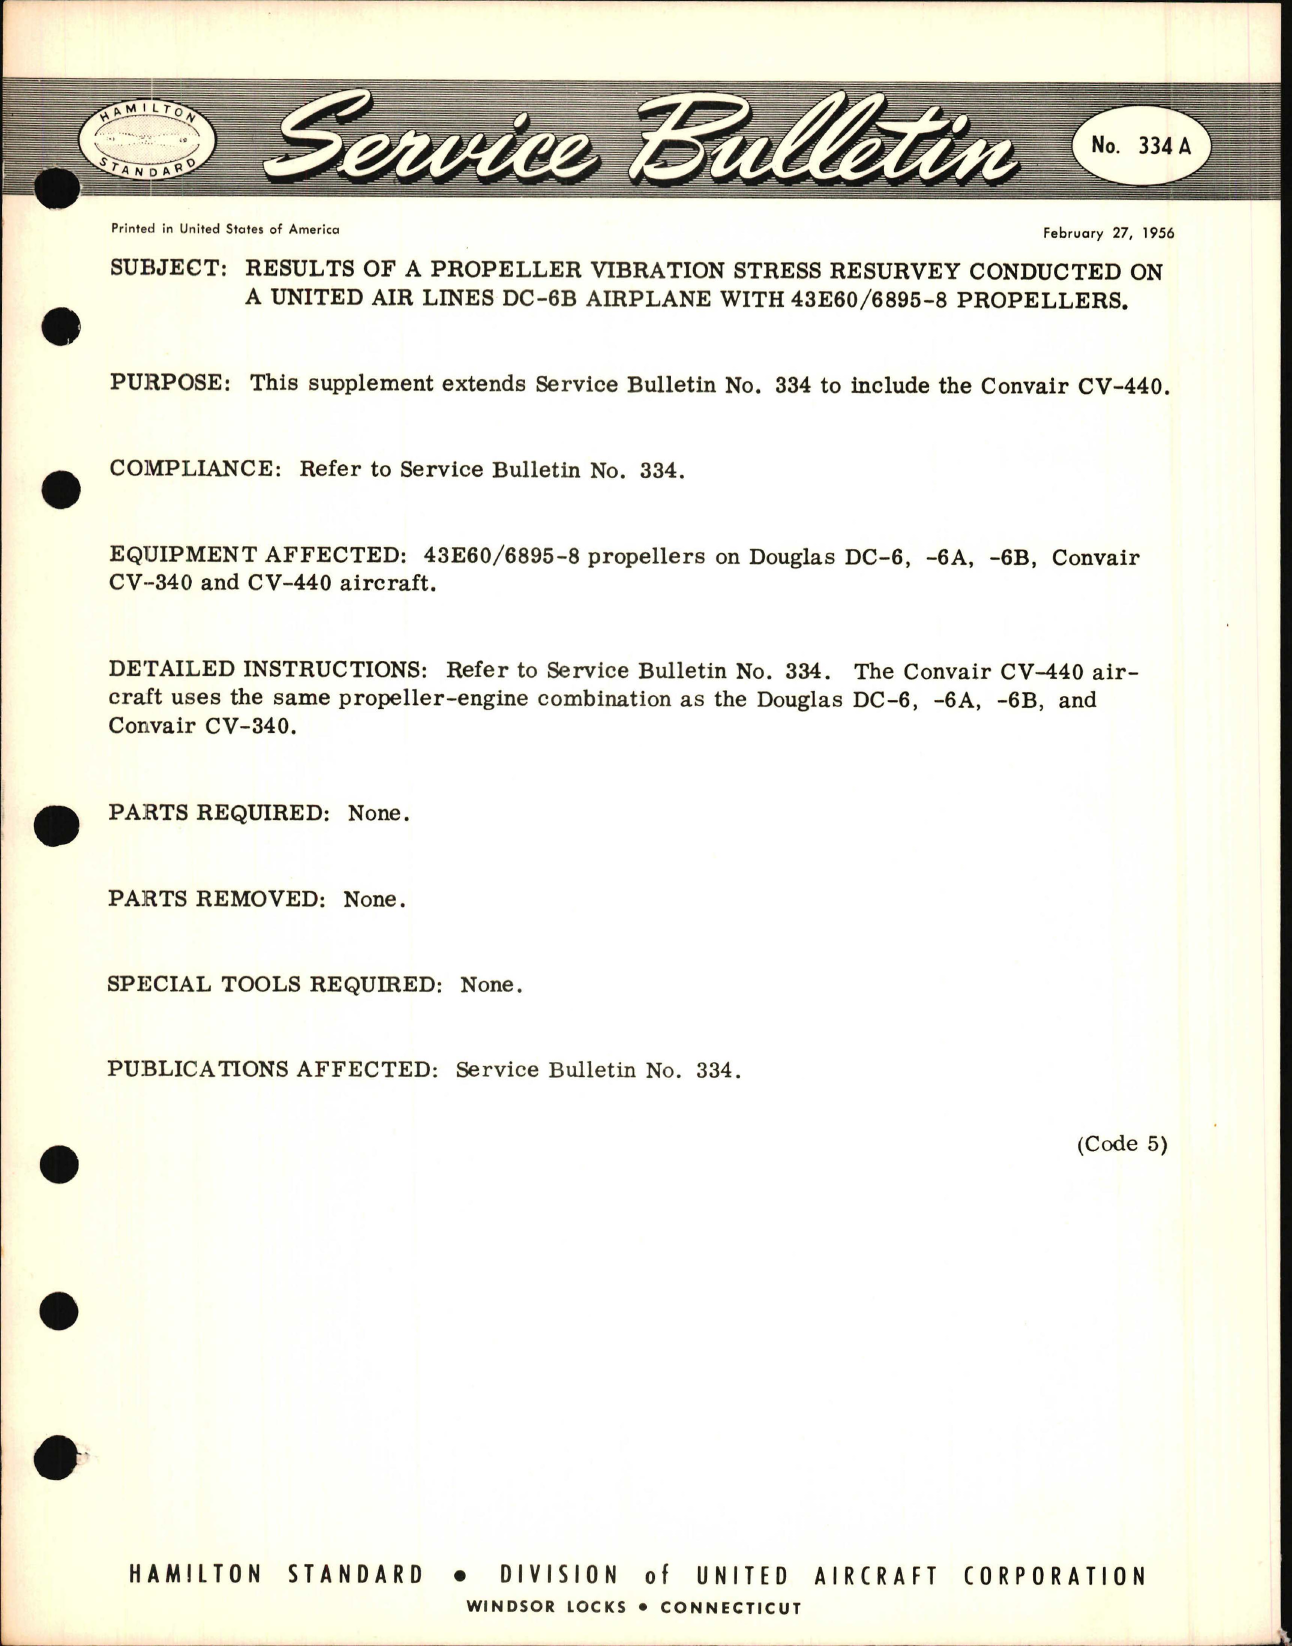 Sample page 1 from AirCorps Library document: Results of a Propeller Vibration Stress Resurvey Conducted on a United Air Lines DC-6B Airplane with 43E60/6895-8 Propellers